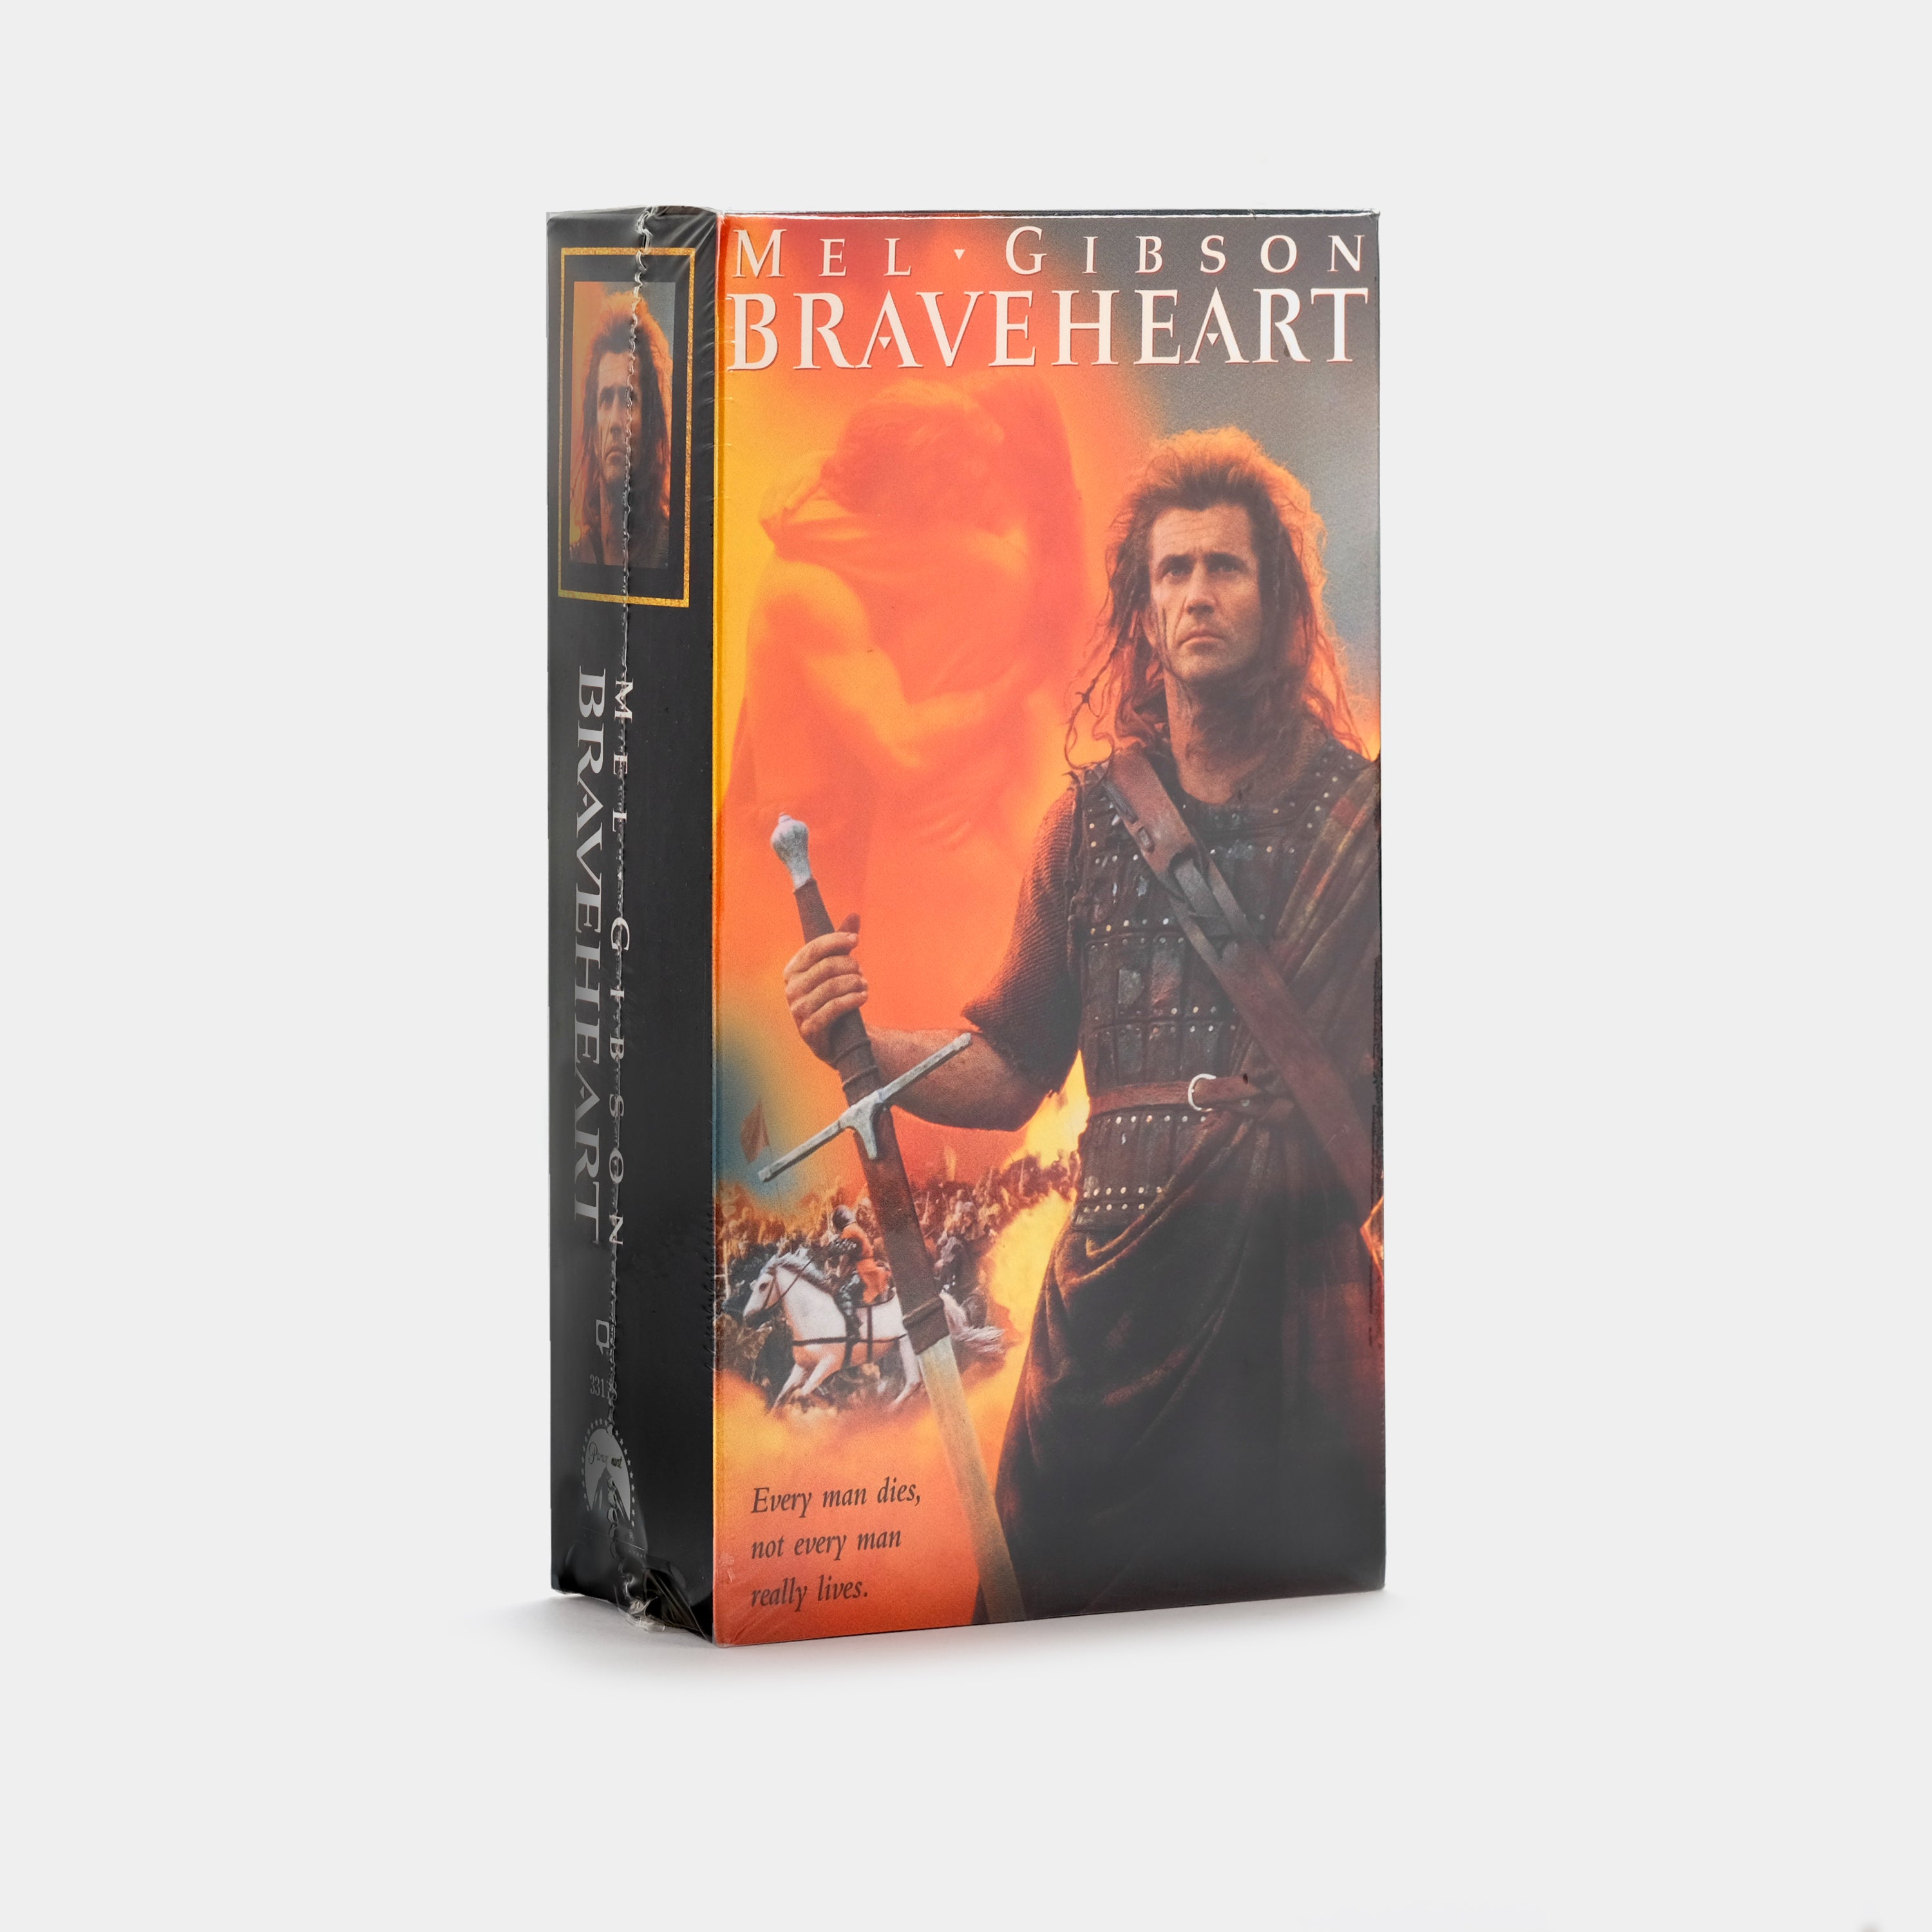 Braveheart (Sealed) VHS Tapes